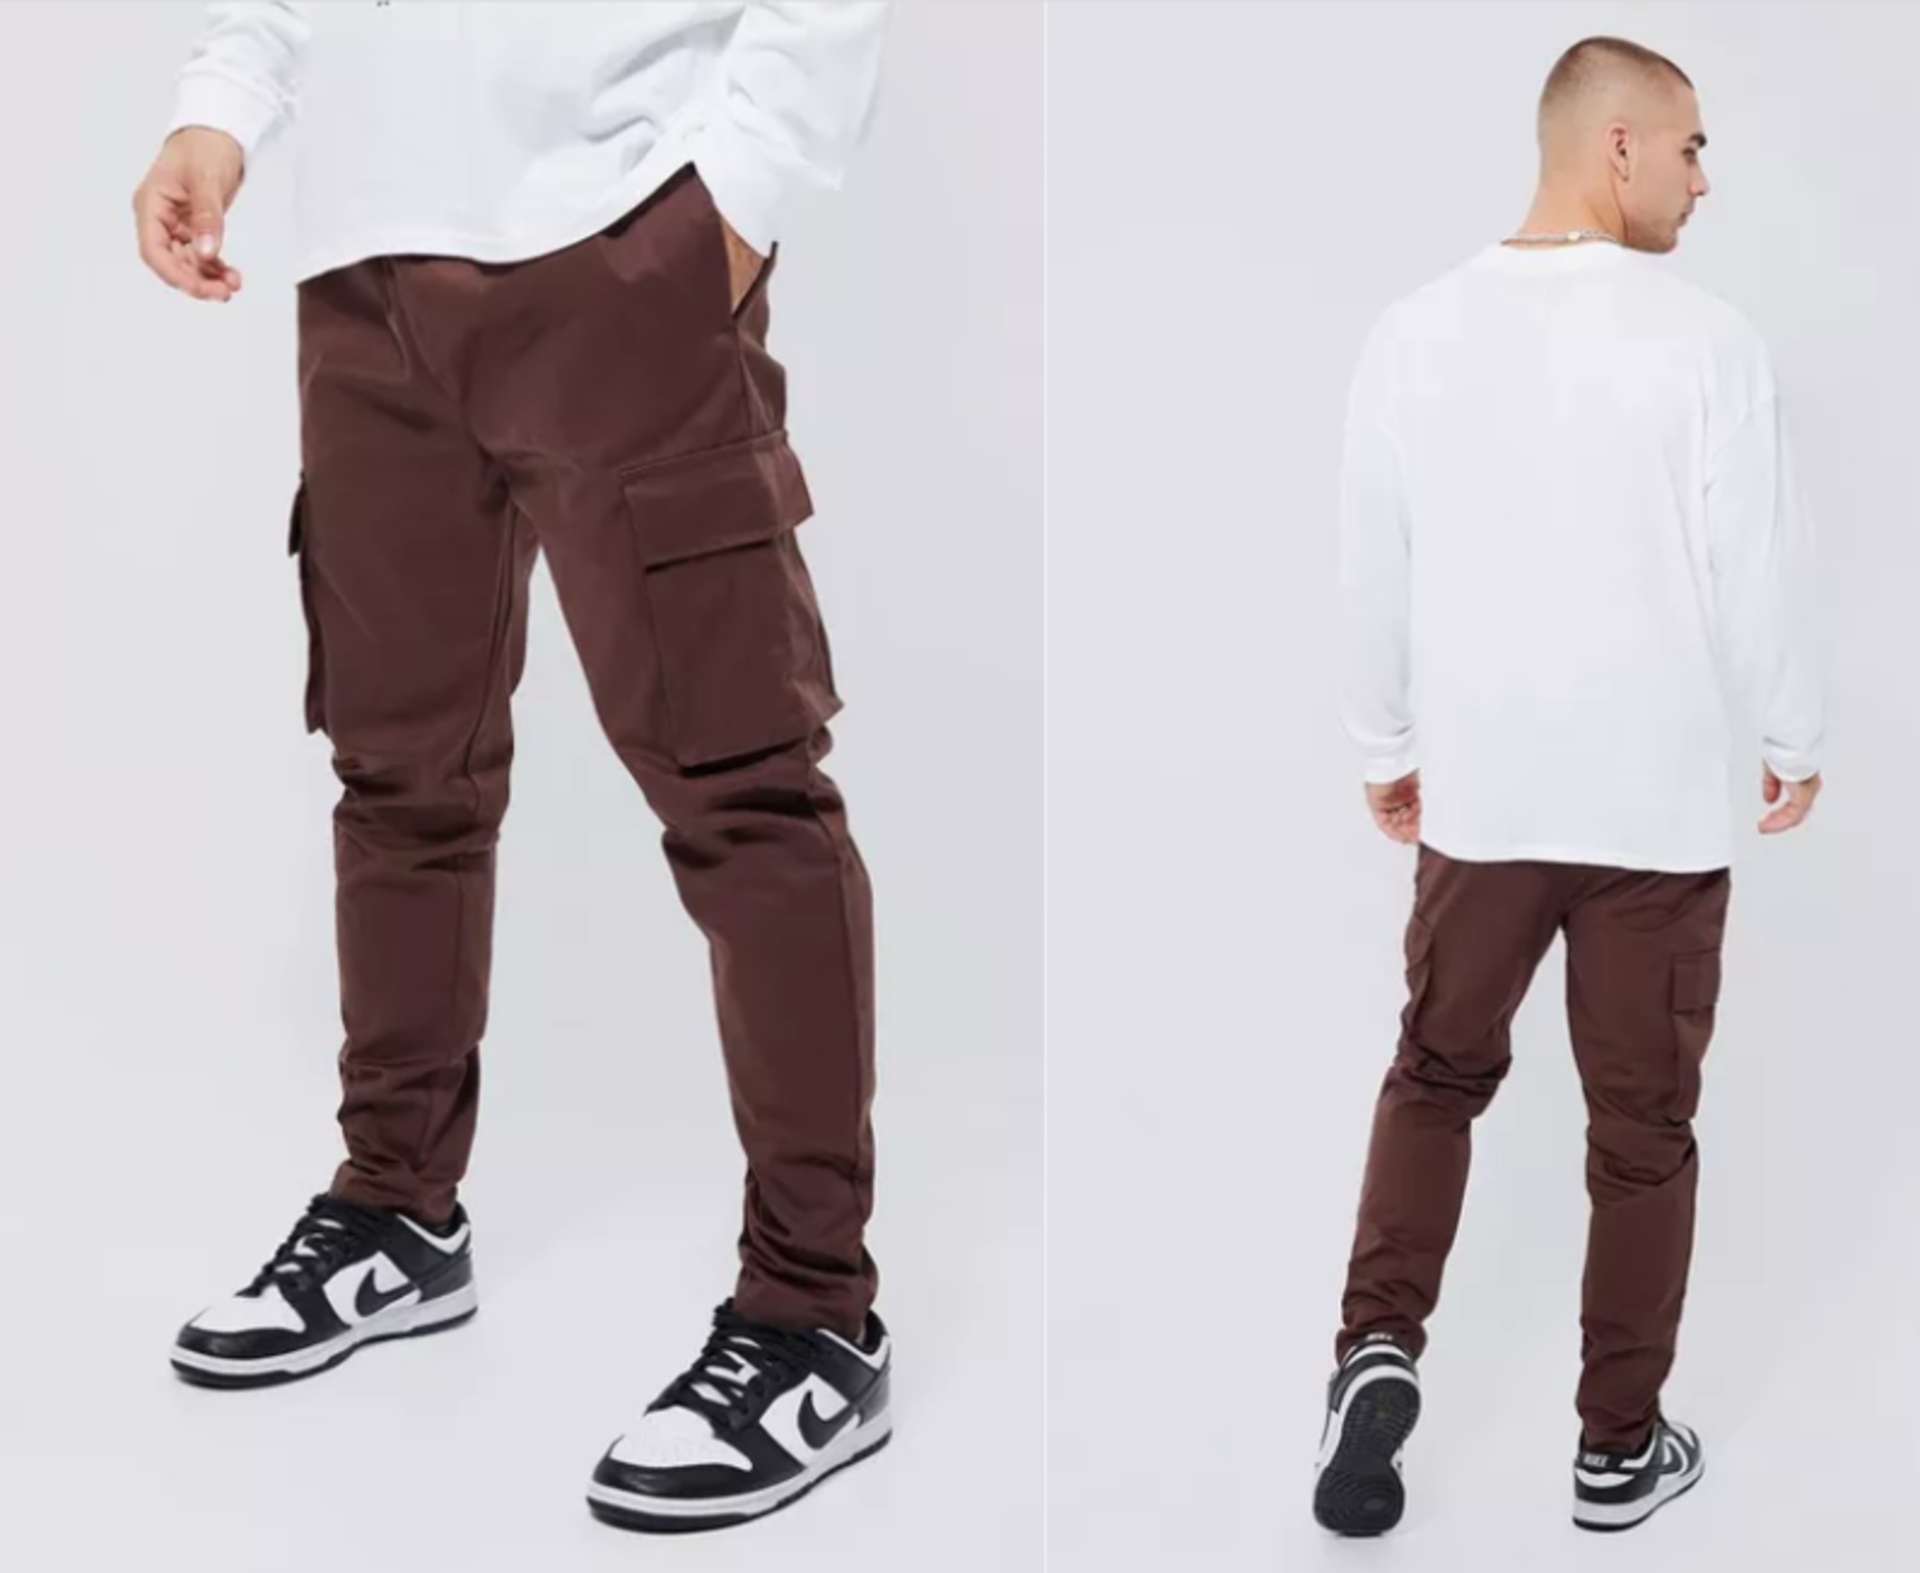 PALLET TO INCLUDE 50 X BRAND NEW BOOHOO CHOCOLATE SKINNY FIT CARGO TROUSERS IN VARIOUS SIZES RRP £22